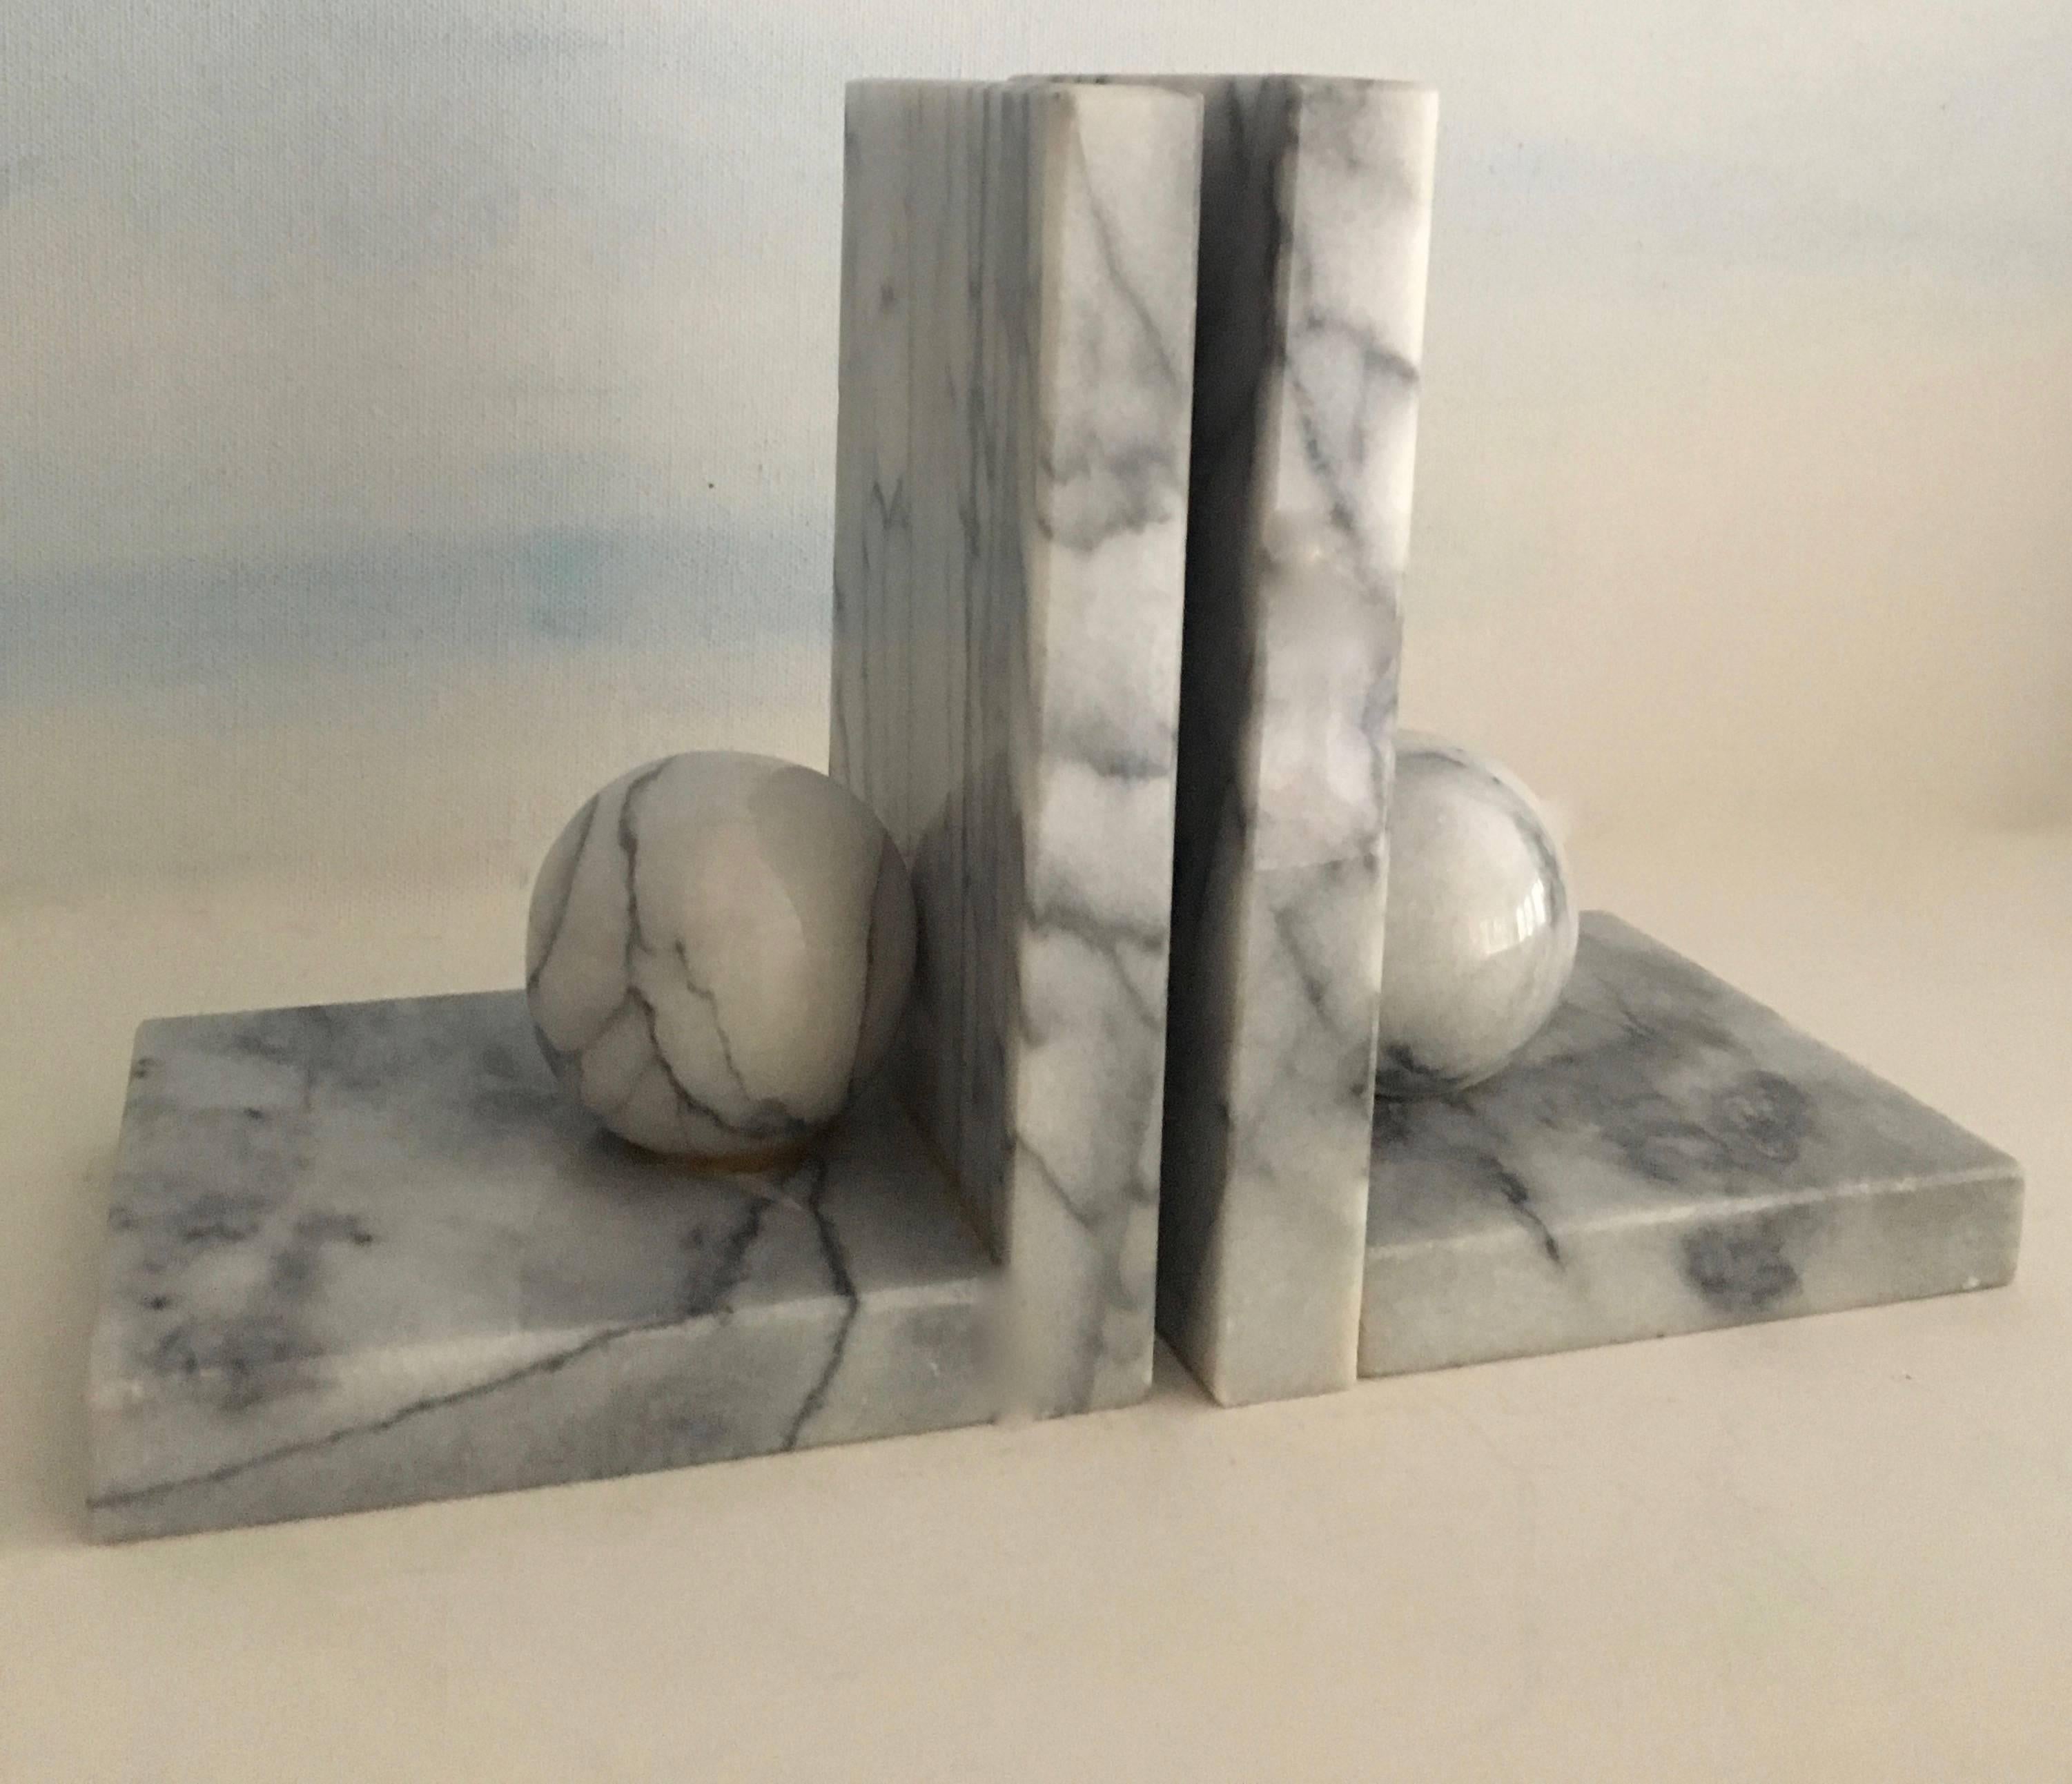 Beautifully styled an simple - marble with sphere detailing.